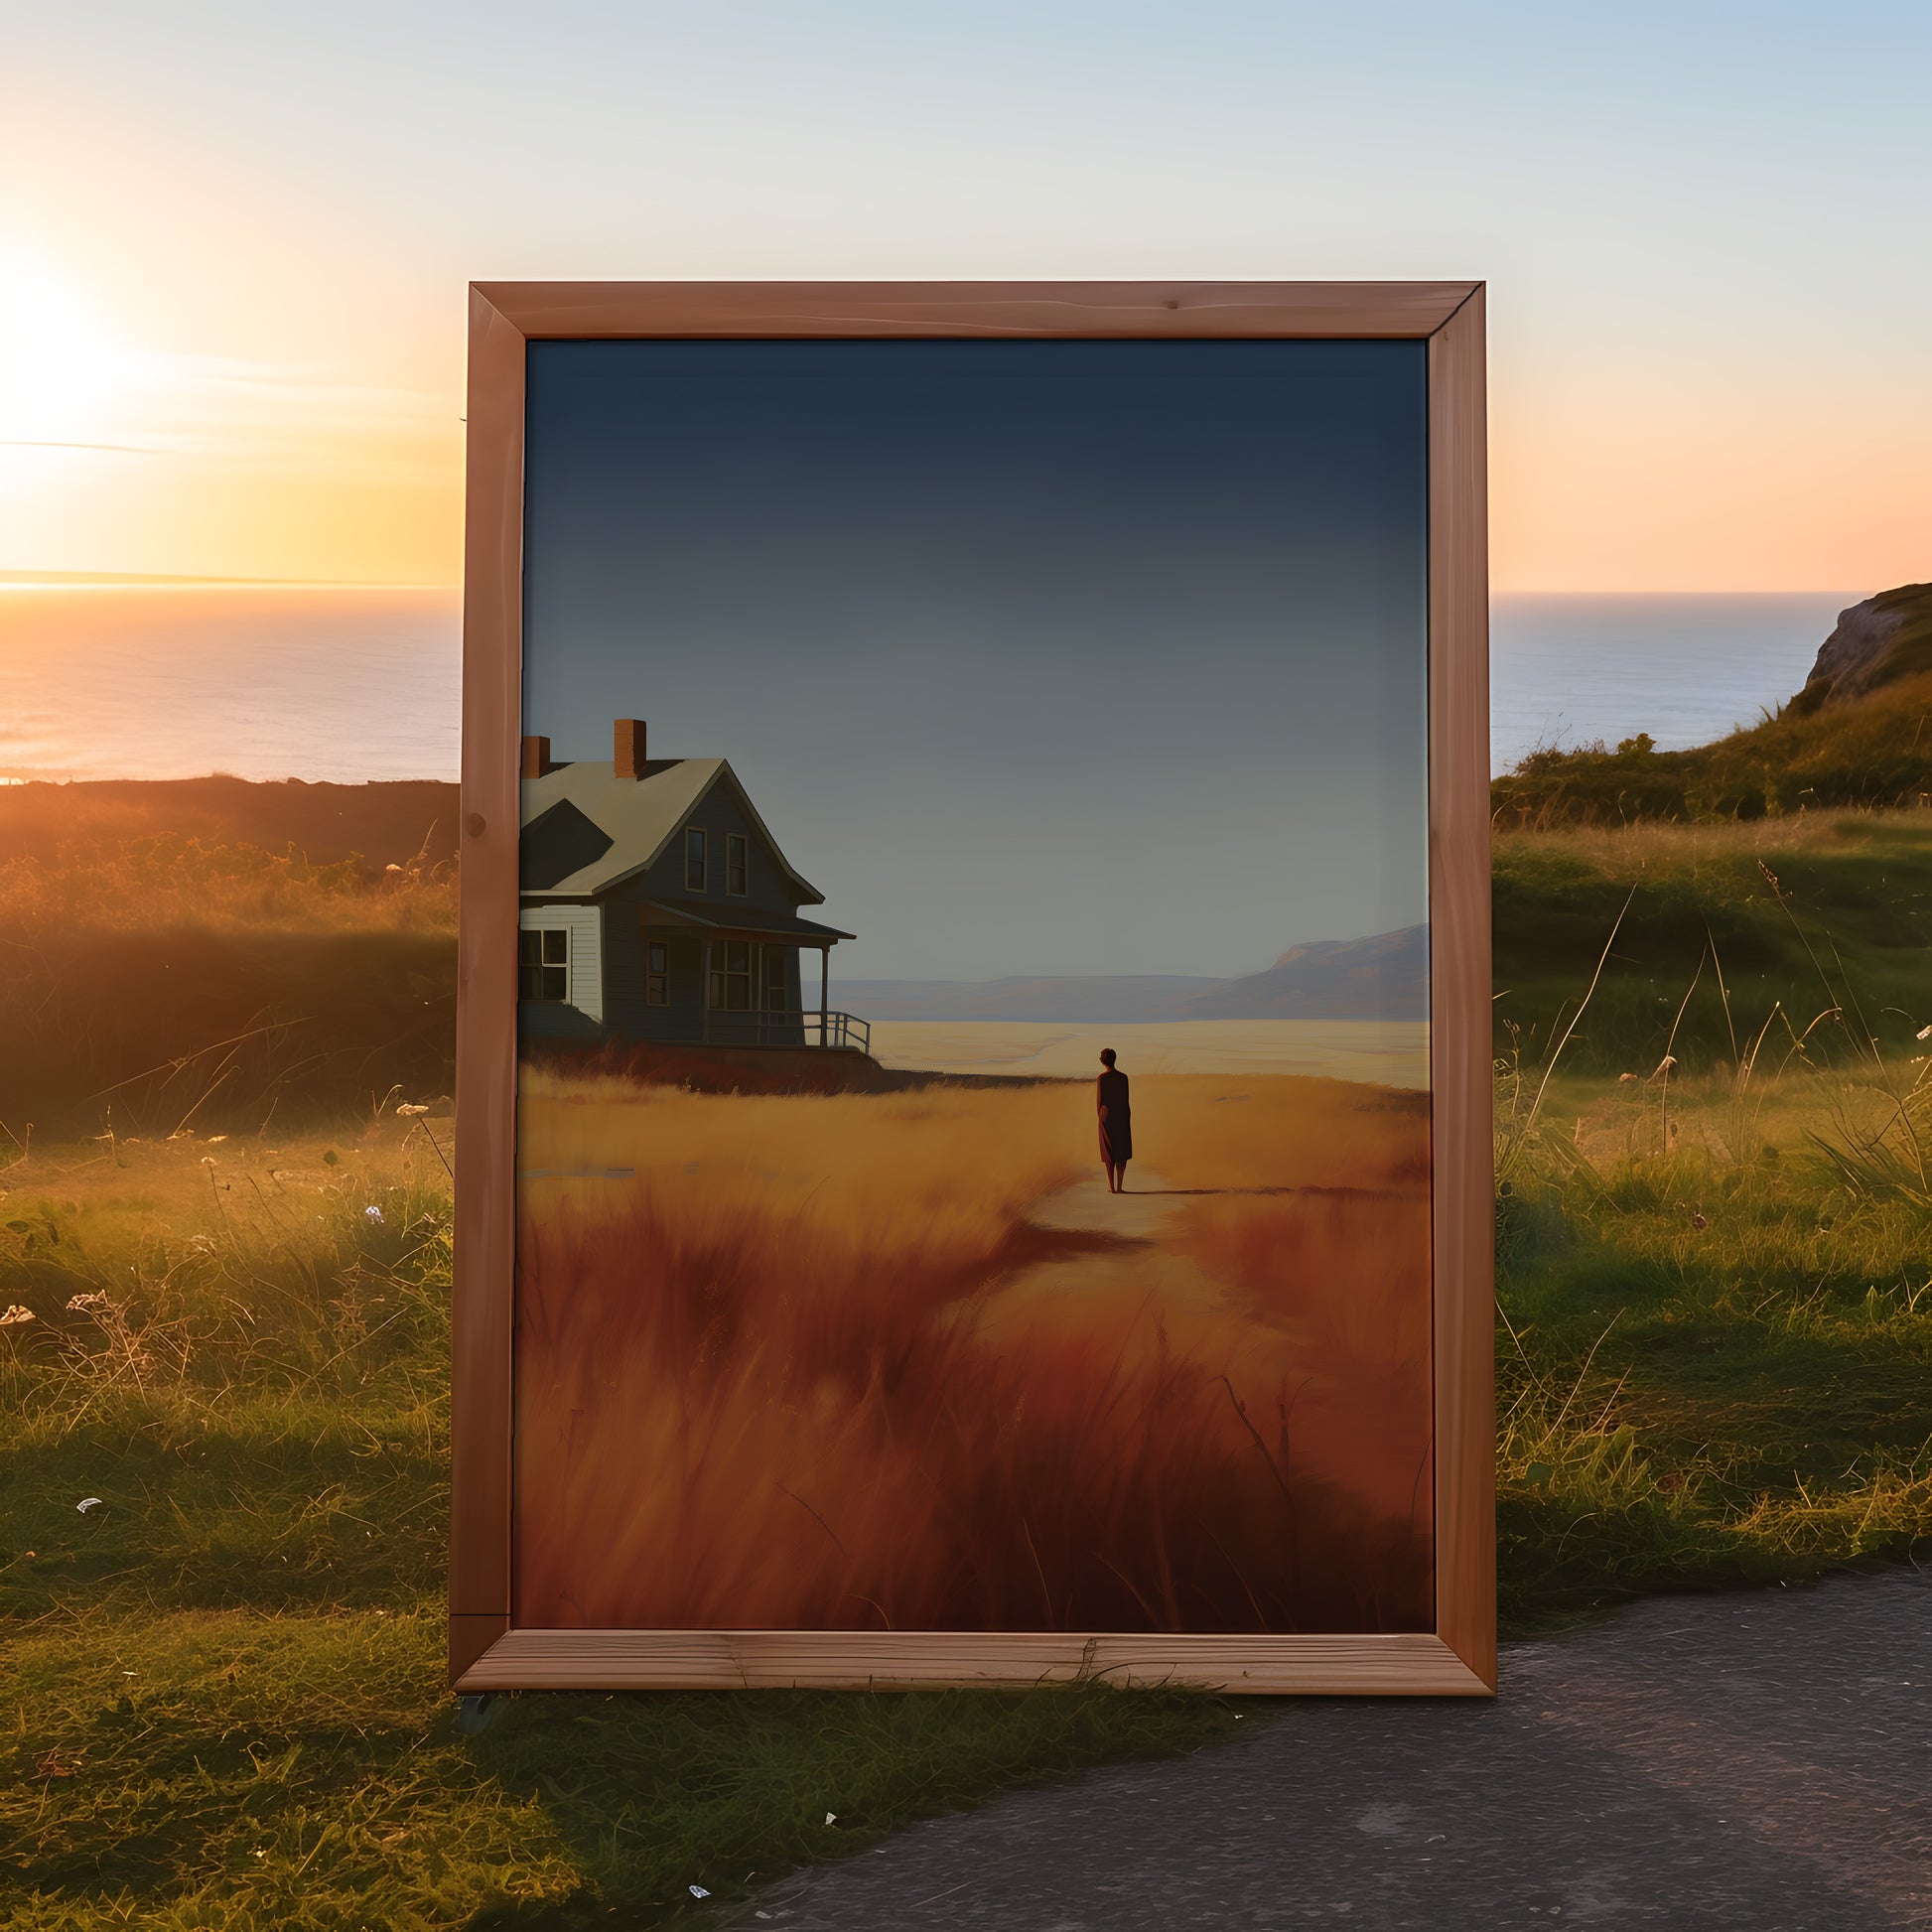 A painting of a person standing by a house, looking at a distant horizon, displayed in a frame positioned outdoors at sunset.